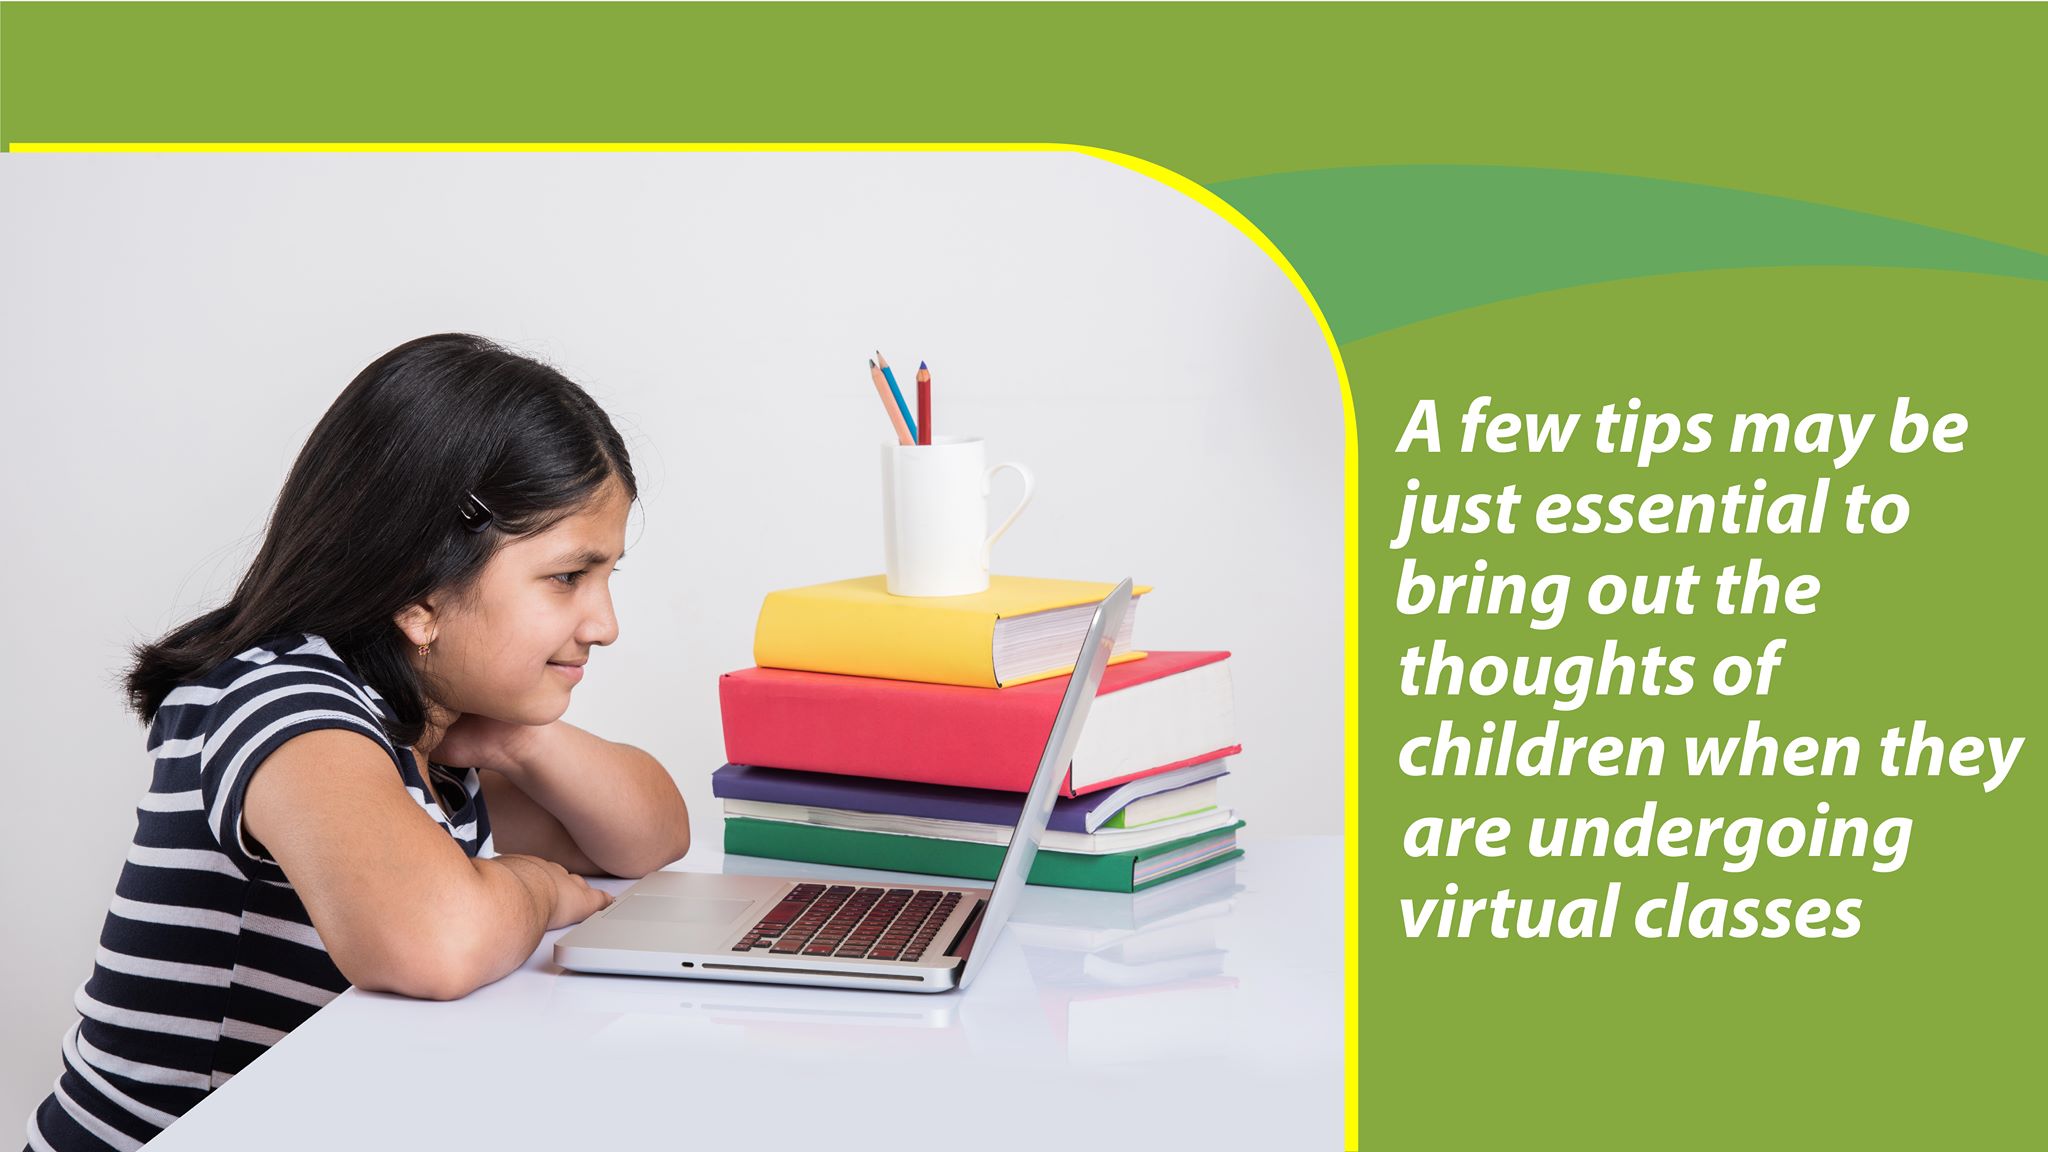 A few tips may be just essential to bring out the thoughts of children when they are undergoing virtual classes